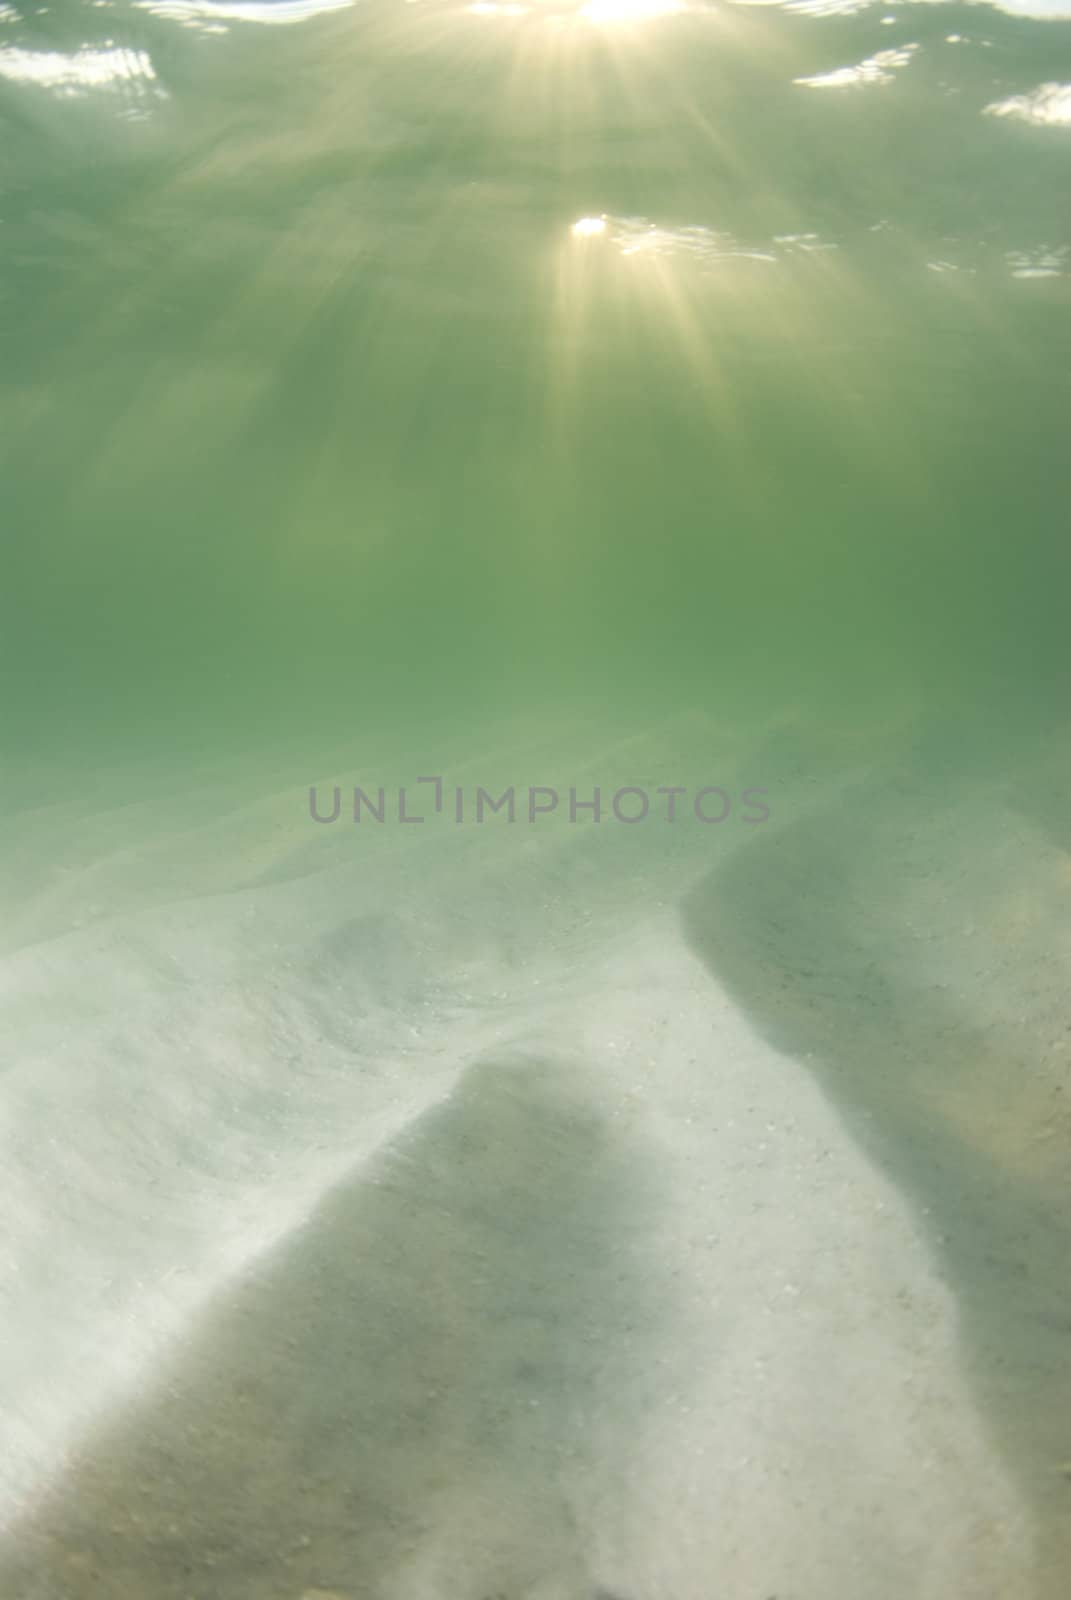 A view of the rippled ocean floor, the action on the surface, and the sky and golden sunset rays breaking through the water. Double top sunrays.